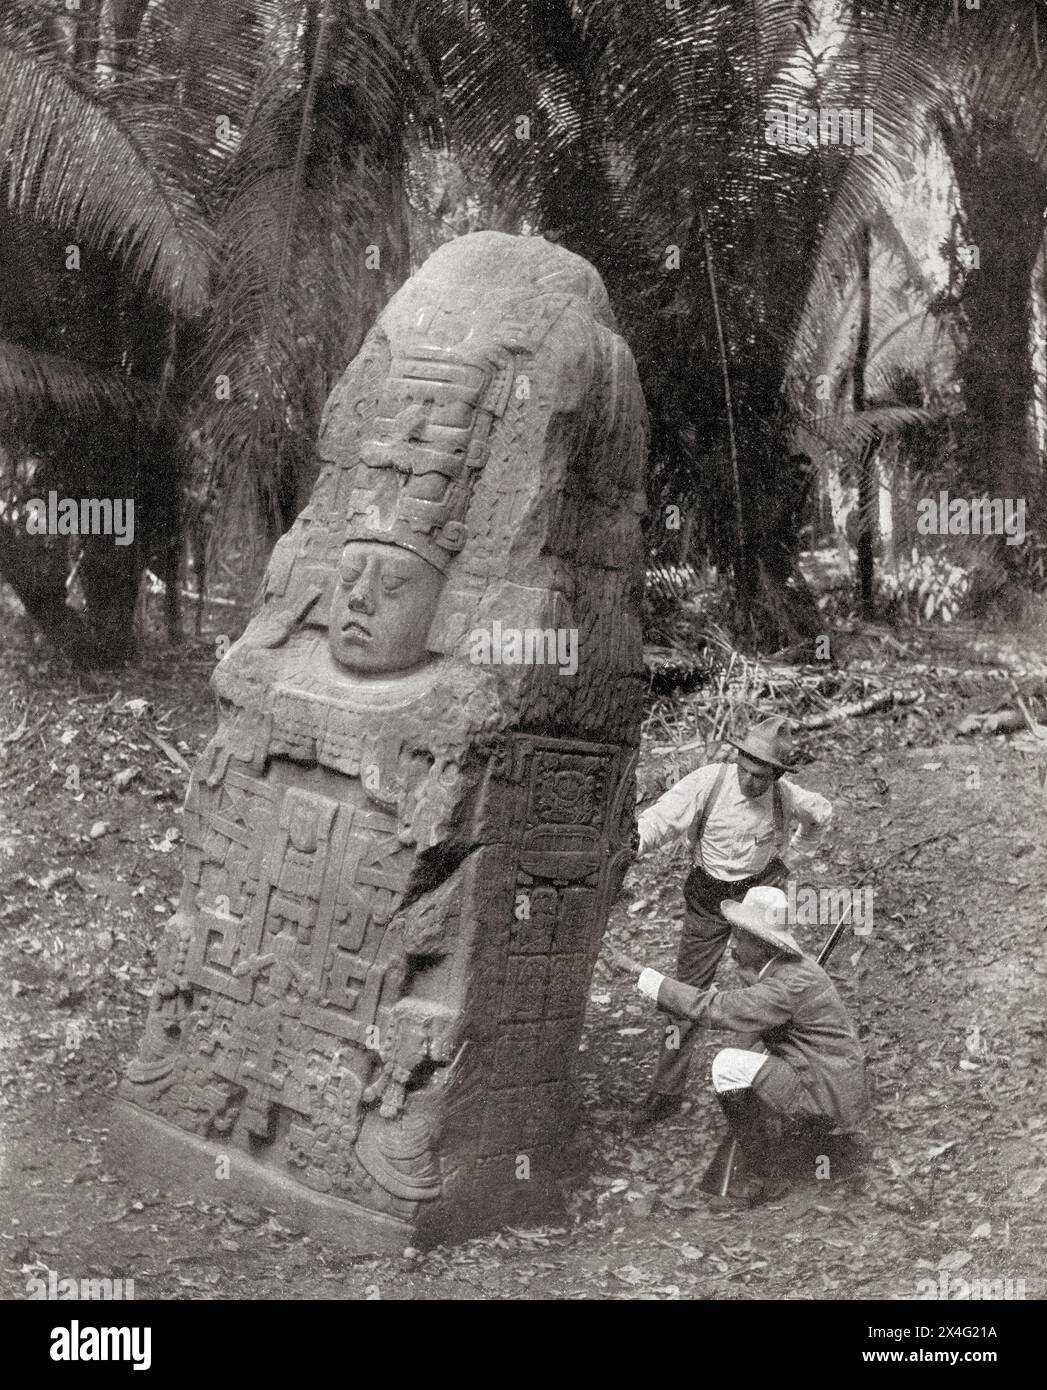 Quiriguá, Izabal, south-eastern Guatemala.  UNESCO World Heritage Site.  Señor Matheu and Señor Valdeavellano examining one of the monuments which had recently been discovered. From Mundo Grafico, published 1912. Stock Photo